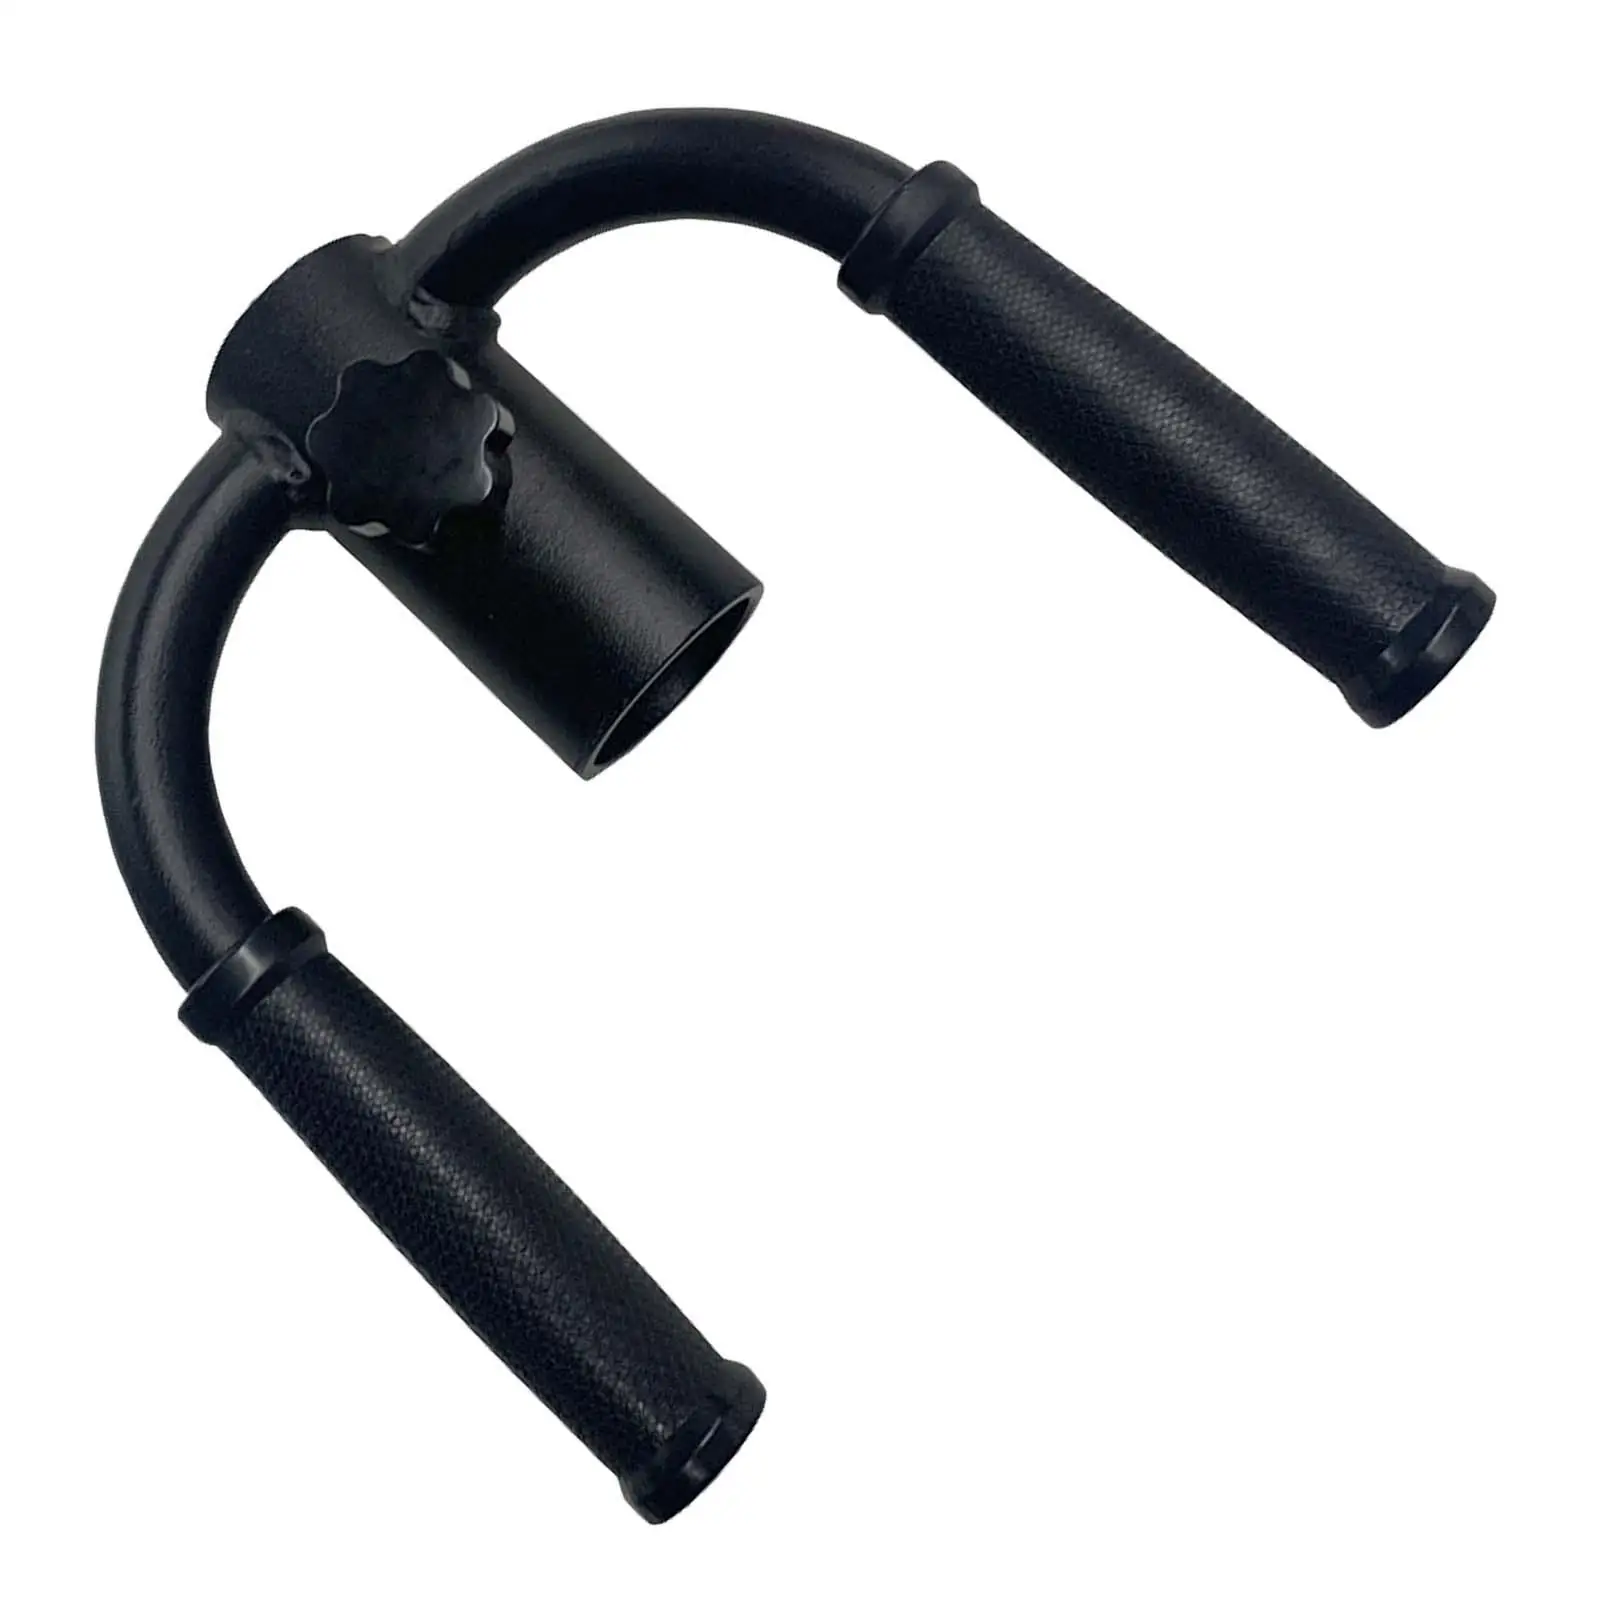 Landmine Handle Attachment for Barbell T Bar Row Attachment for Hamstrings Shoulders Strength Training Pull Ups Triceps